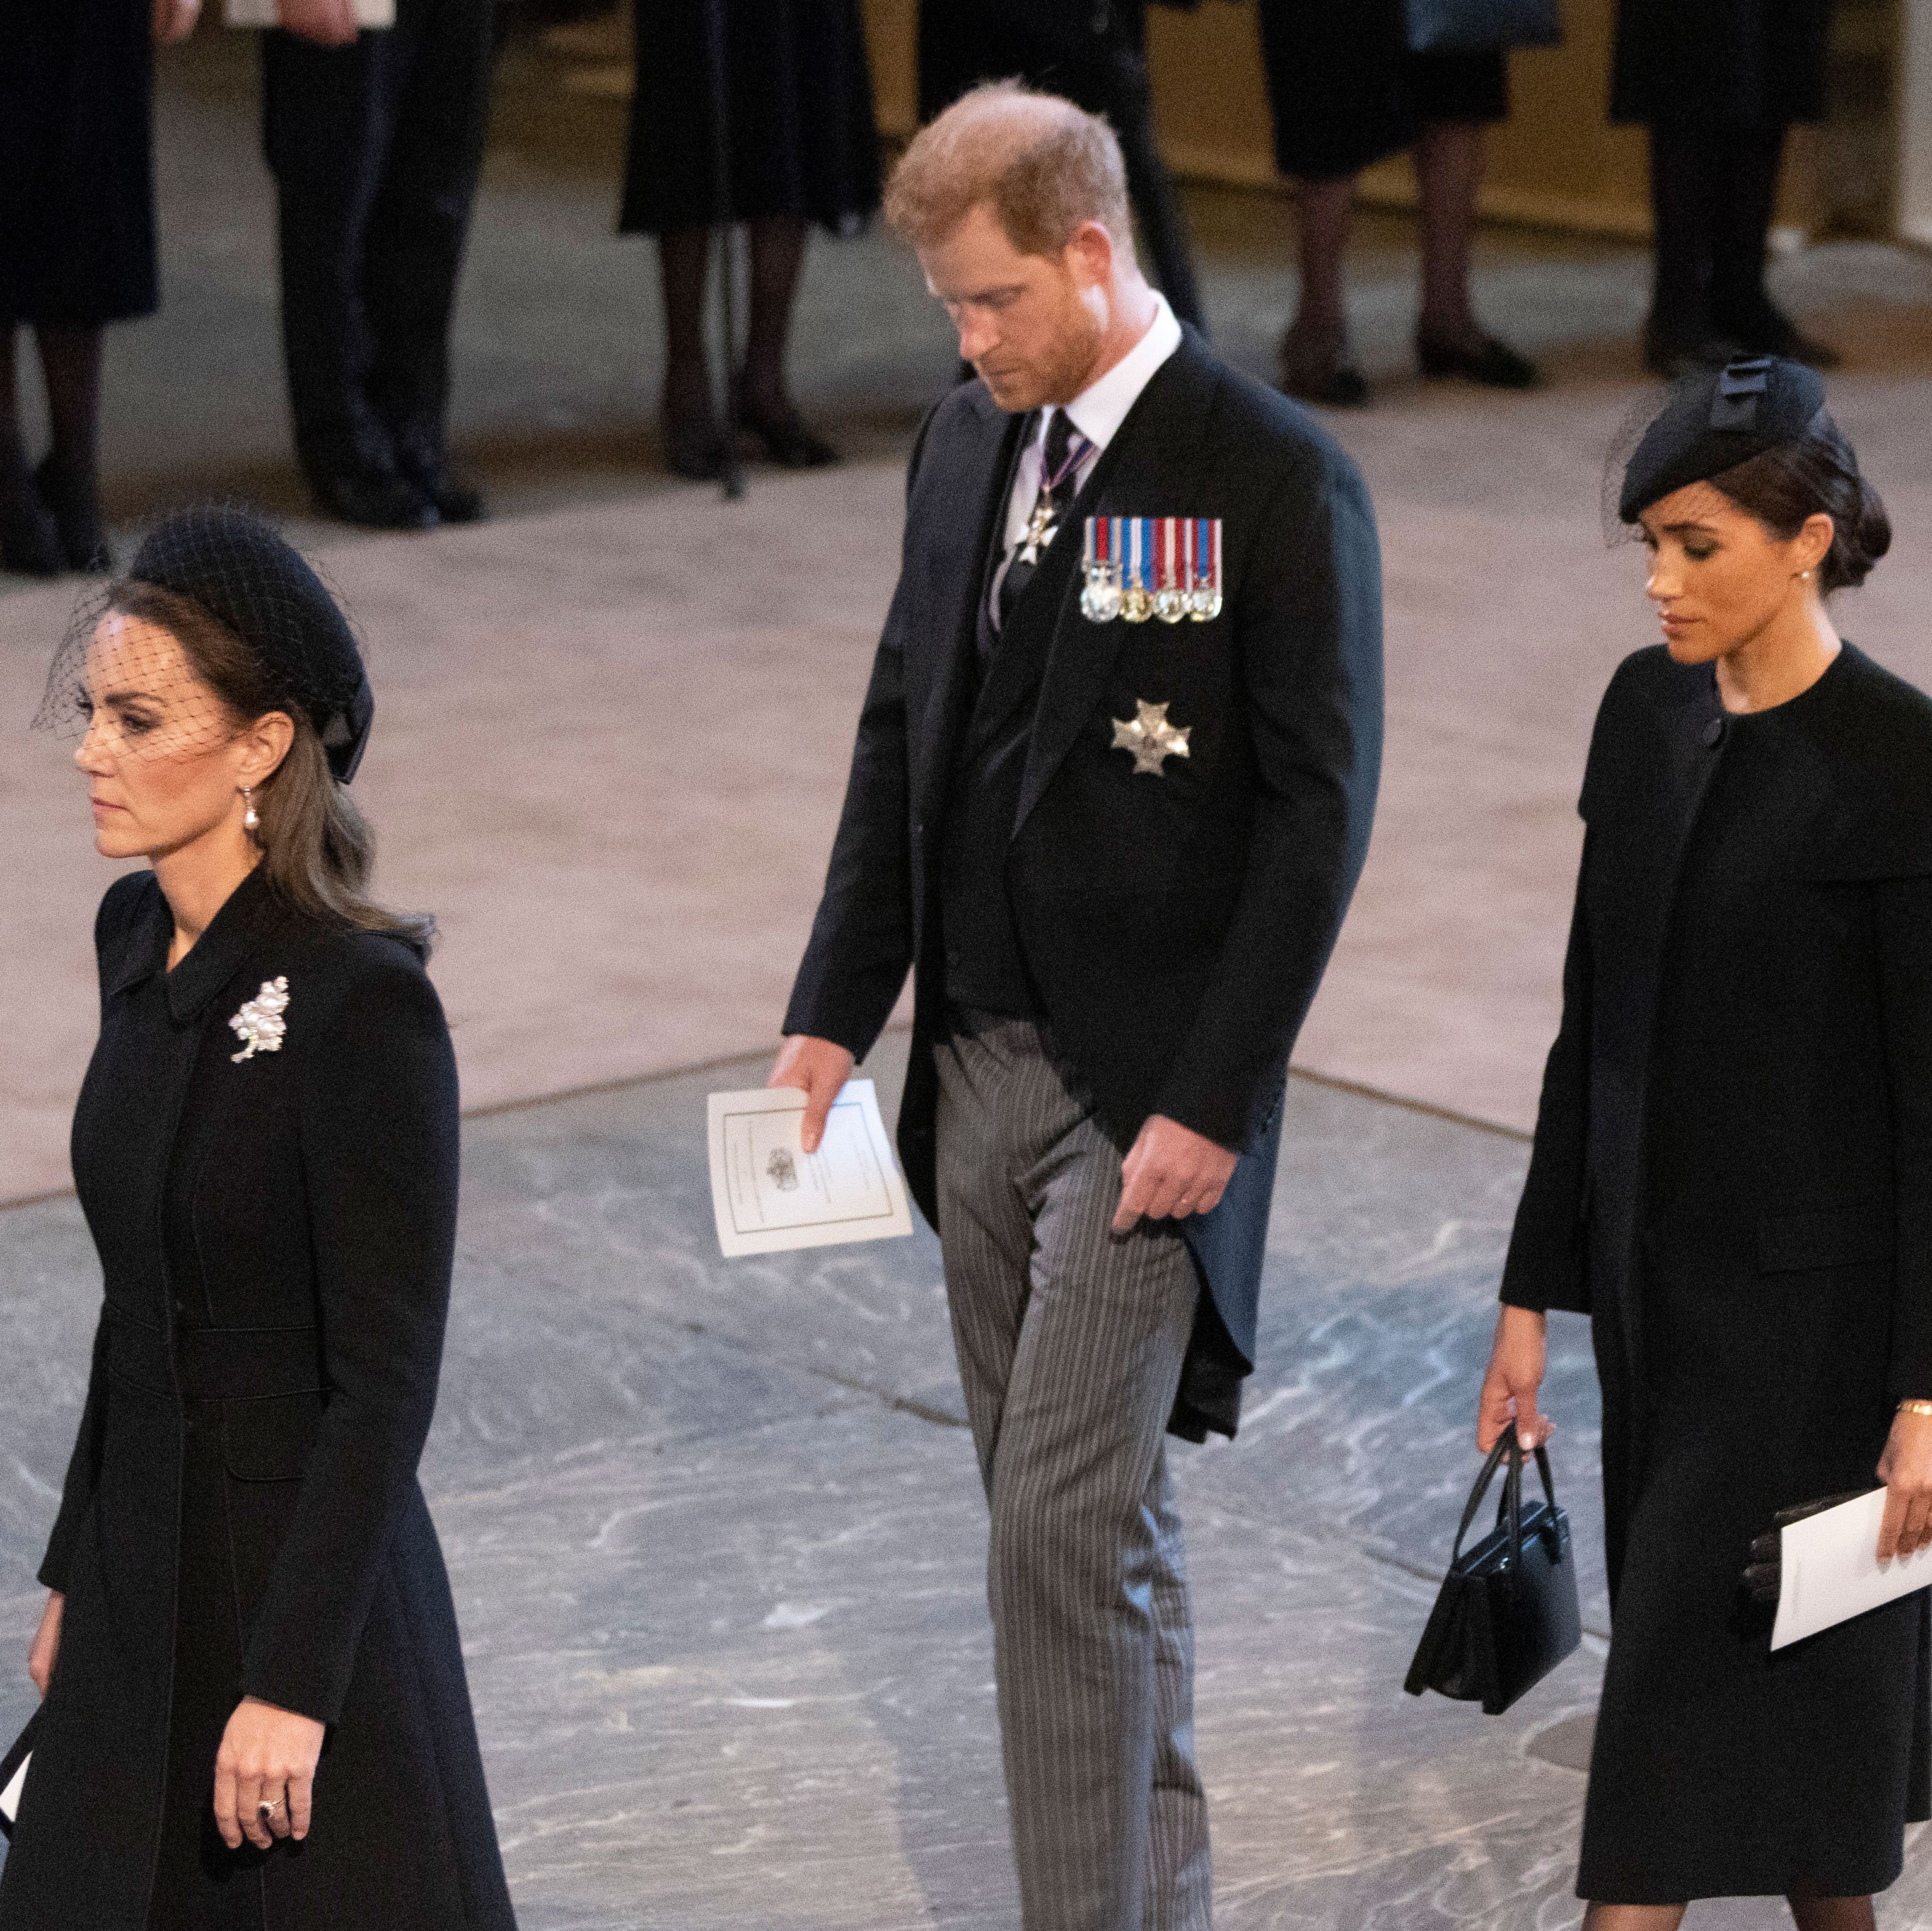 Kate Middleton and Meghan Markle Reportedly Didn’t Talk to Each Other at All During the Queen’s Funeral Events